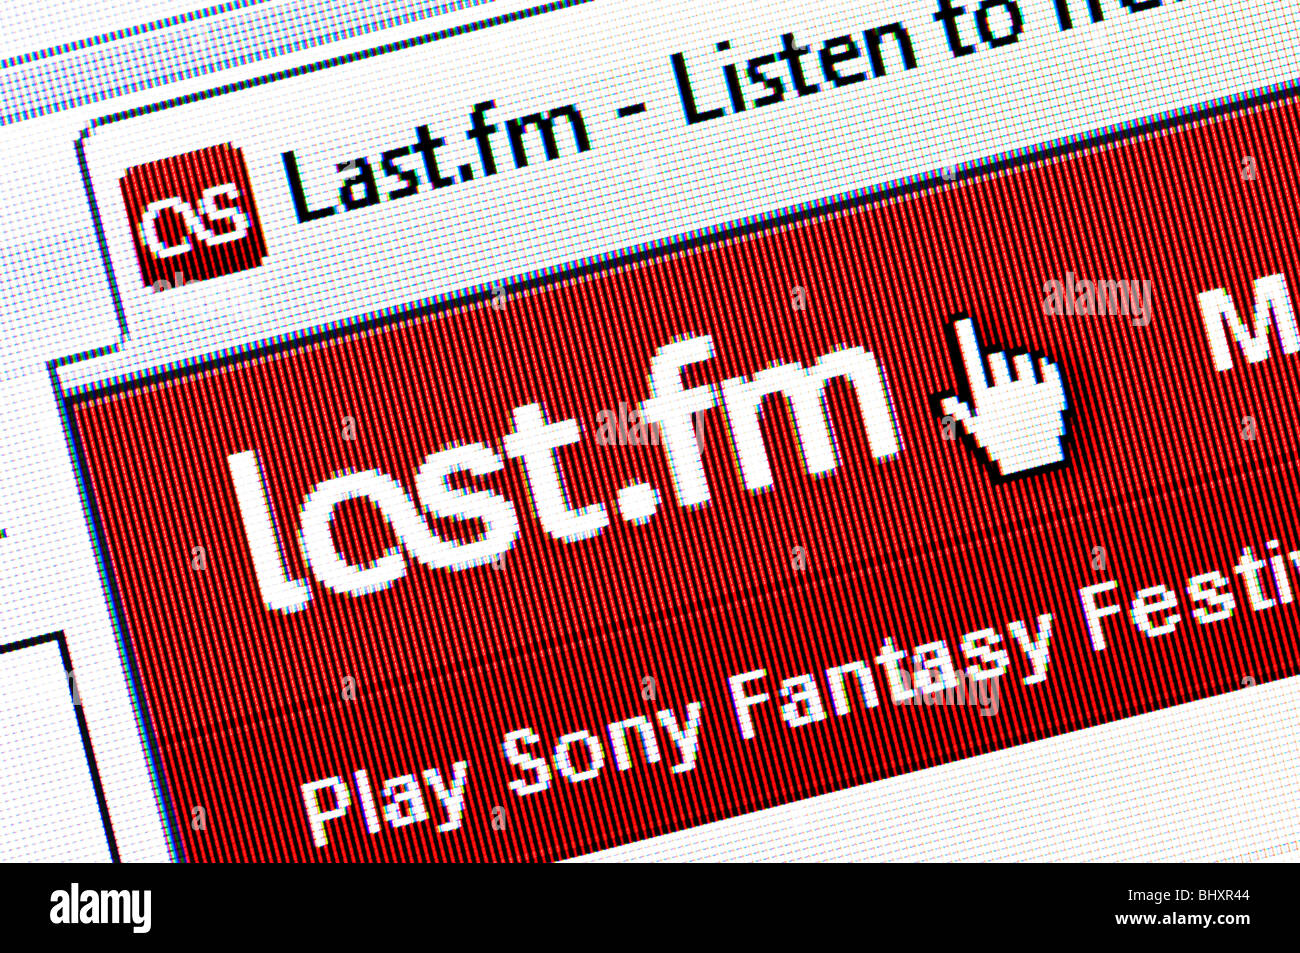 Macro screenshot of the Last.fm website - the internet music radio and social networking site. Editorial use only. Stock Photo